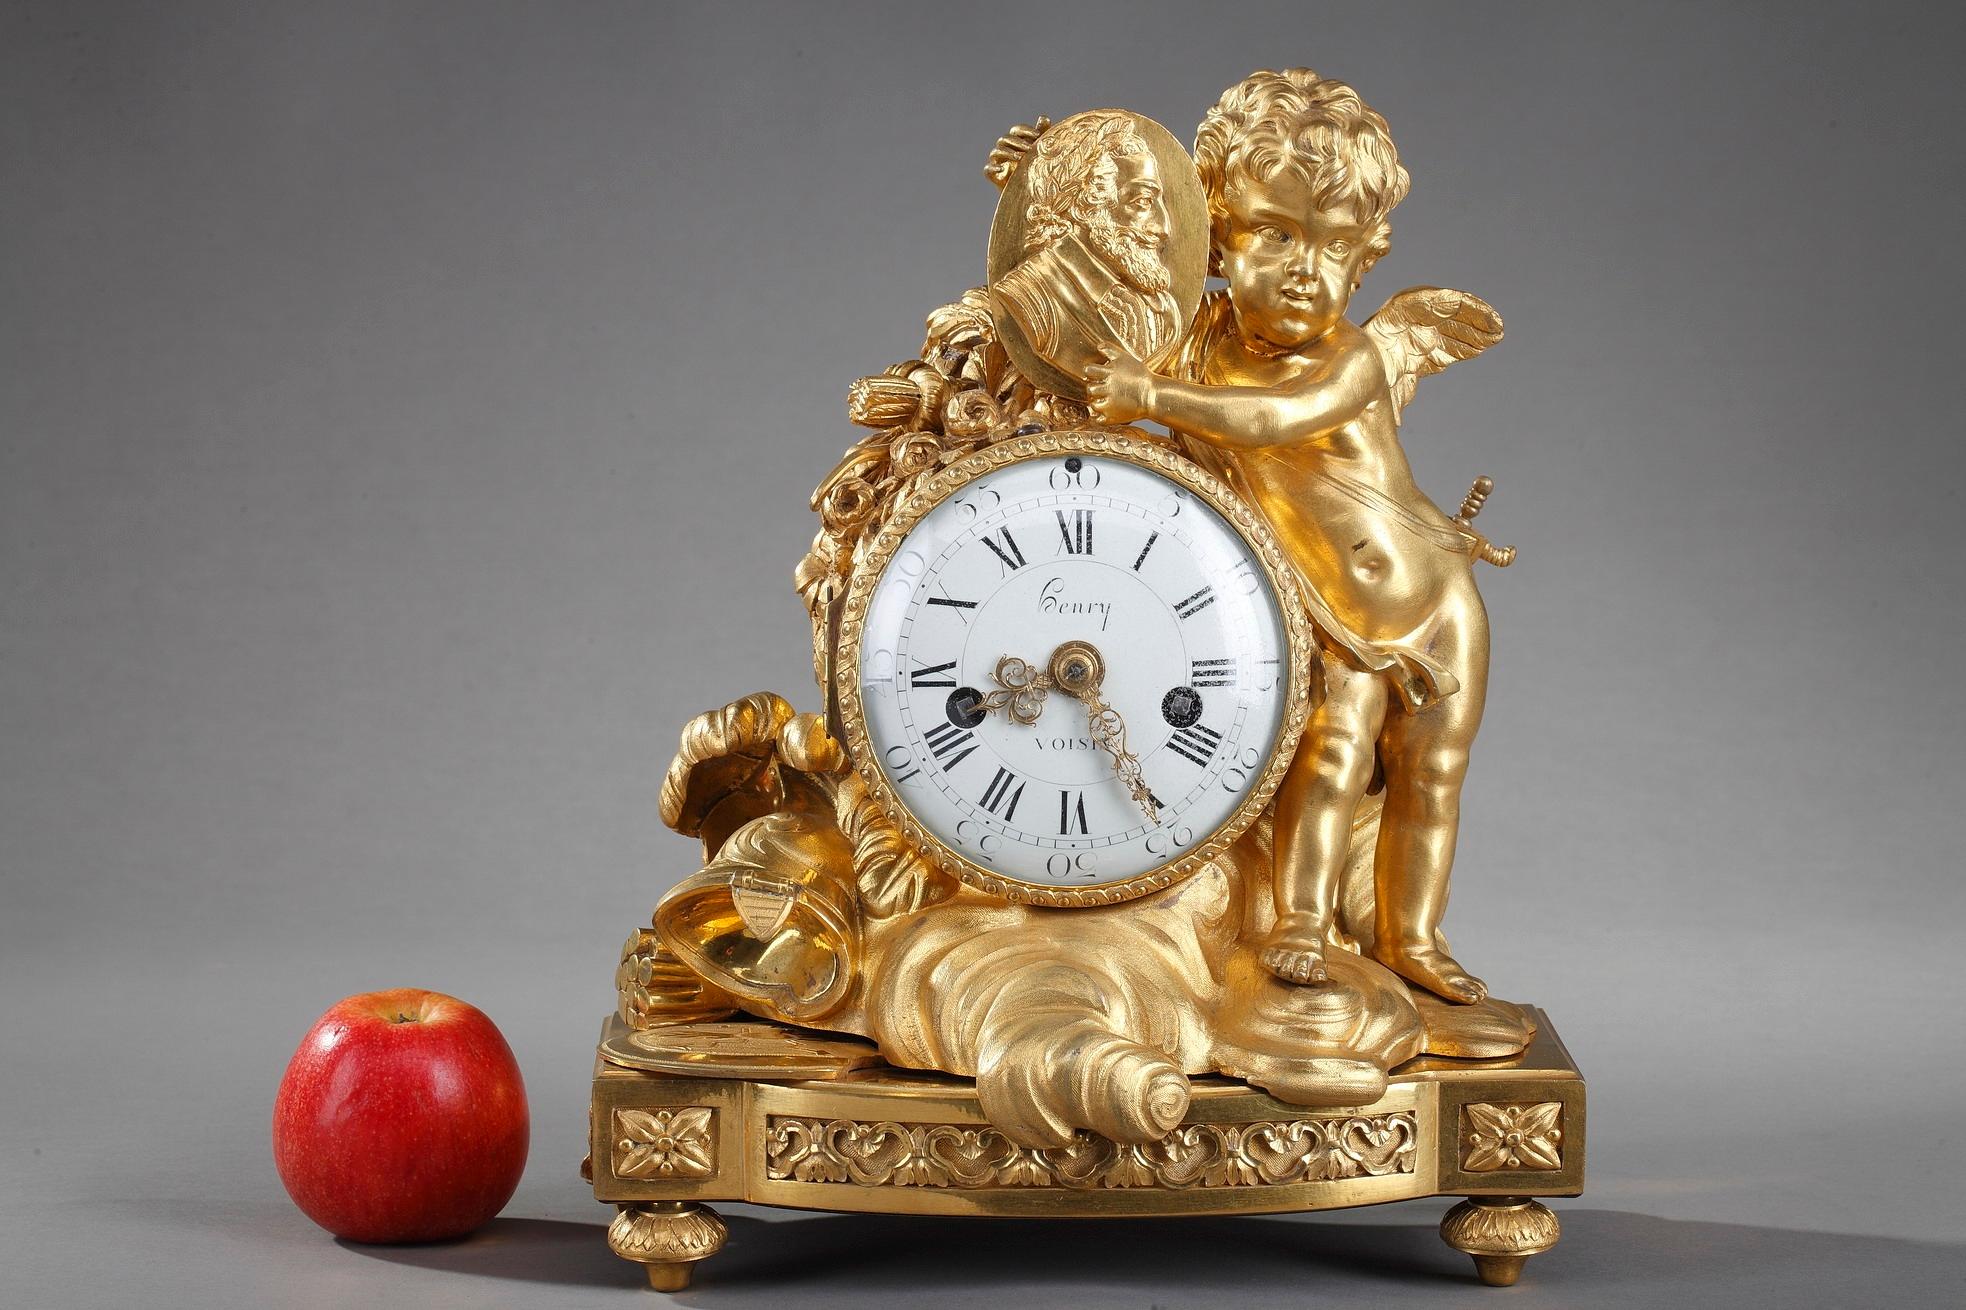 Late 18th century Louis XVI table clock crafted in gilt bronze featuring a winged Cupid presenting a medallion portrait of the founder of the Bourbon dynasty in France, the king Henri IV (1553-1610). Cupid carries the sword, symbol of the king's